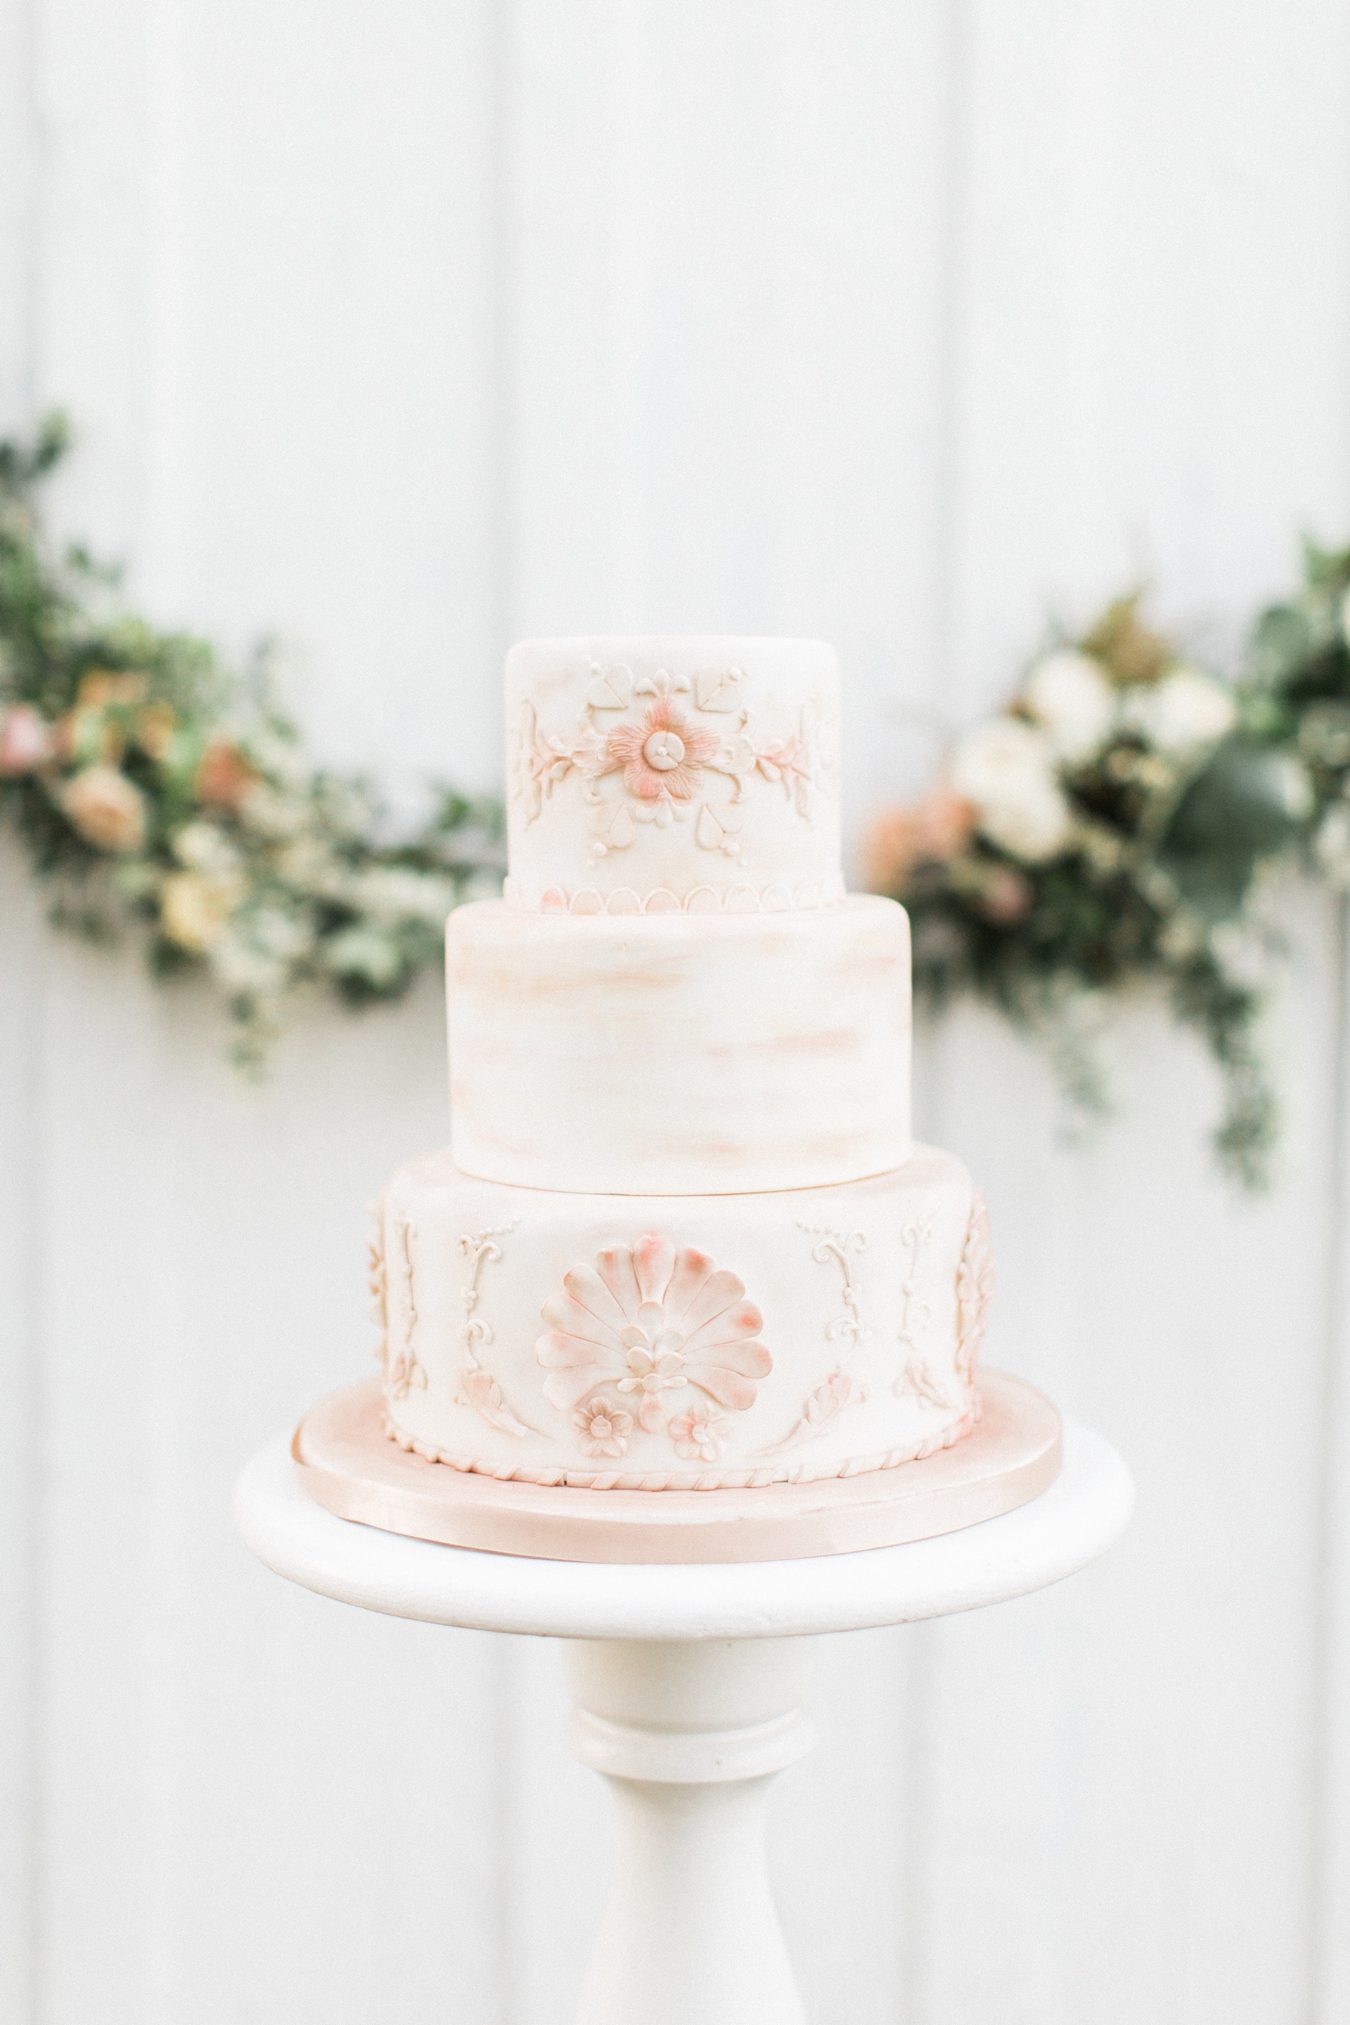 Bella e Dolce custom cake | Fountain Point Resort | Sincerely, Ginger Event Design & Production | BLOOM Floral Design | Cory Weber Photography